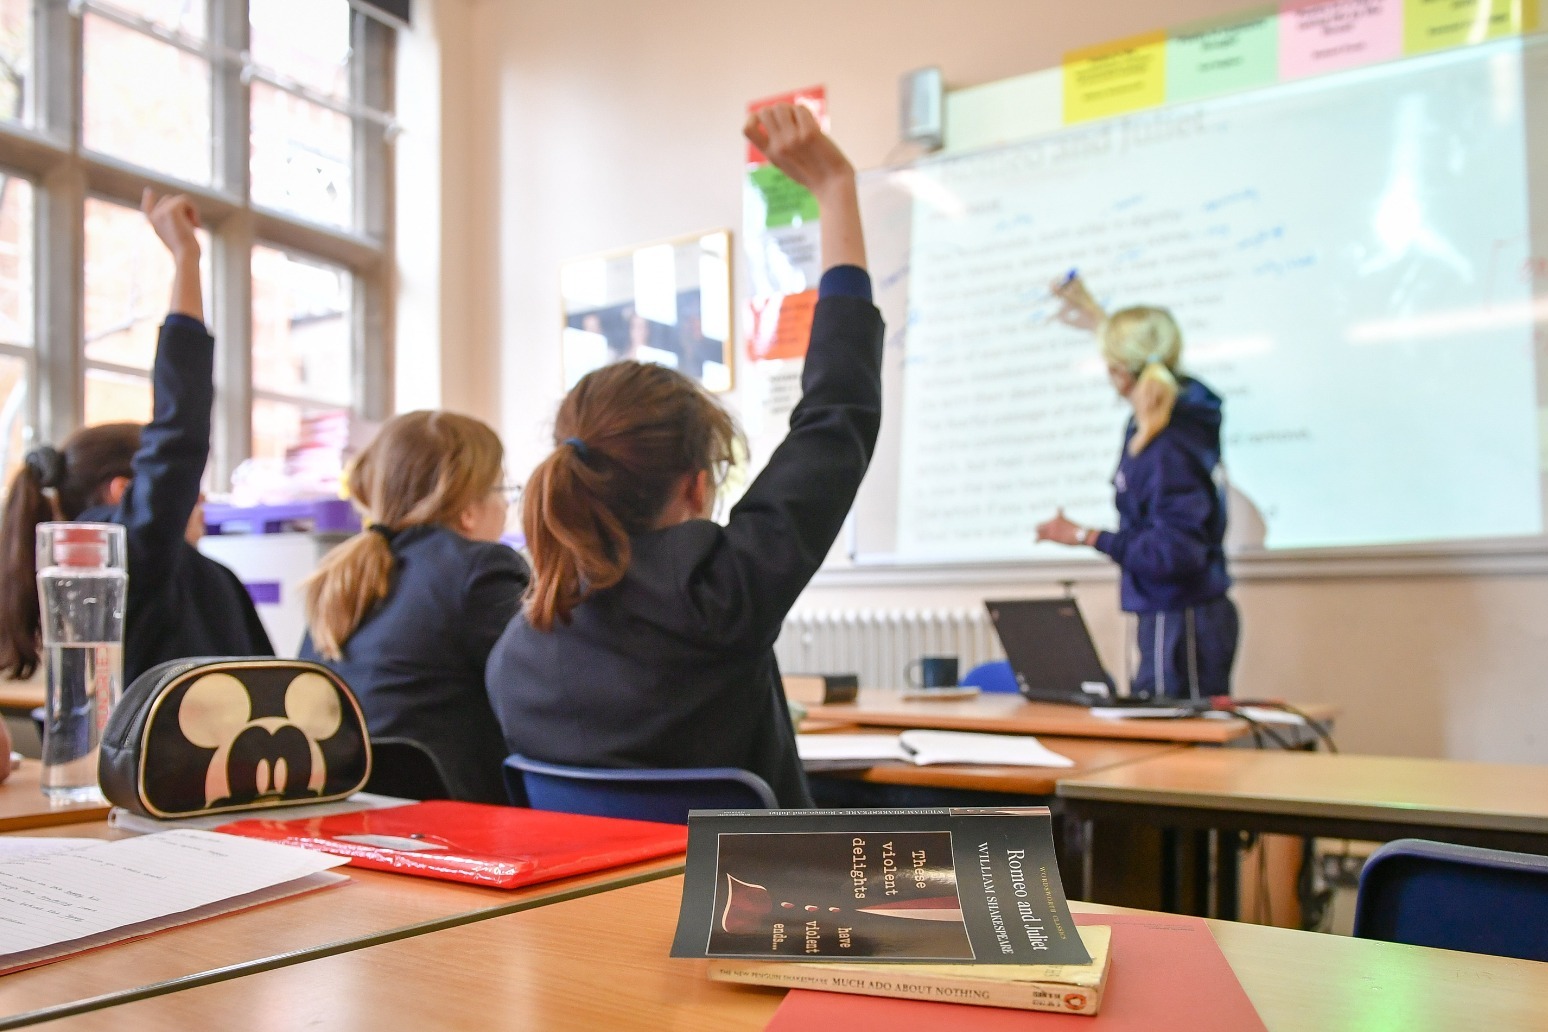 Report calls for primary school exclusions to be banned by 2026 